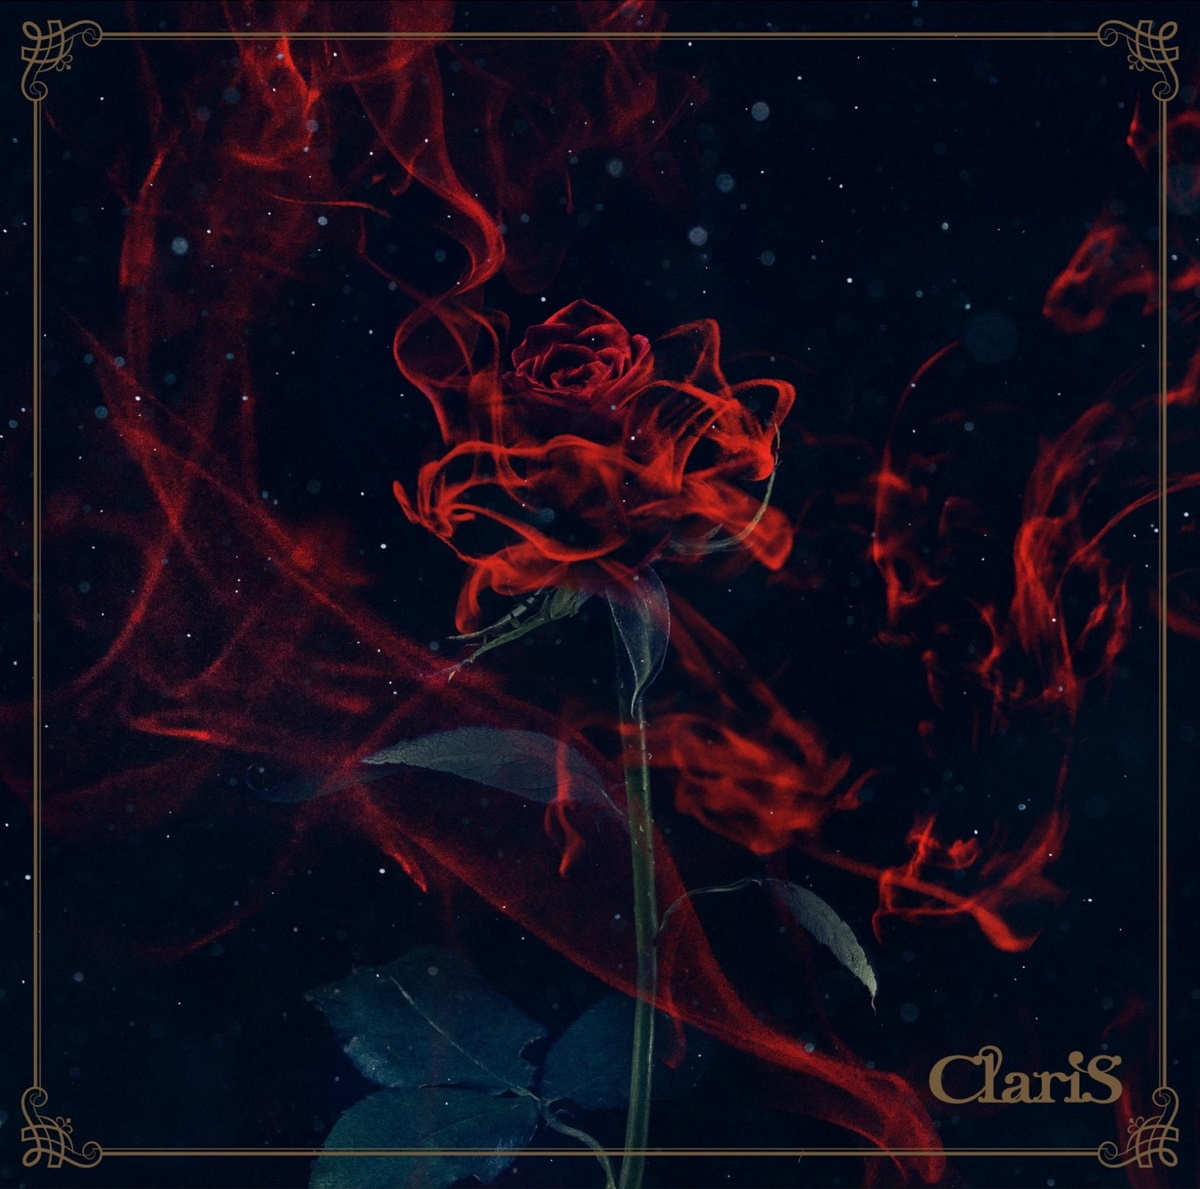 Cover art for『ClariS - It's showtime!!』from the release『Masquerade』